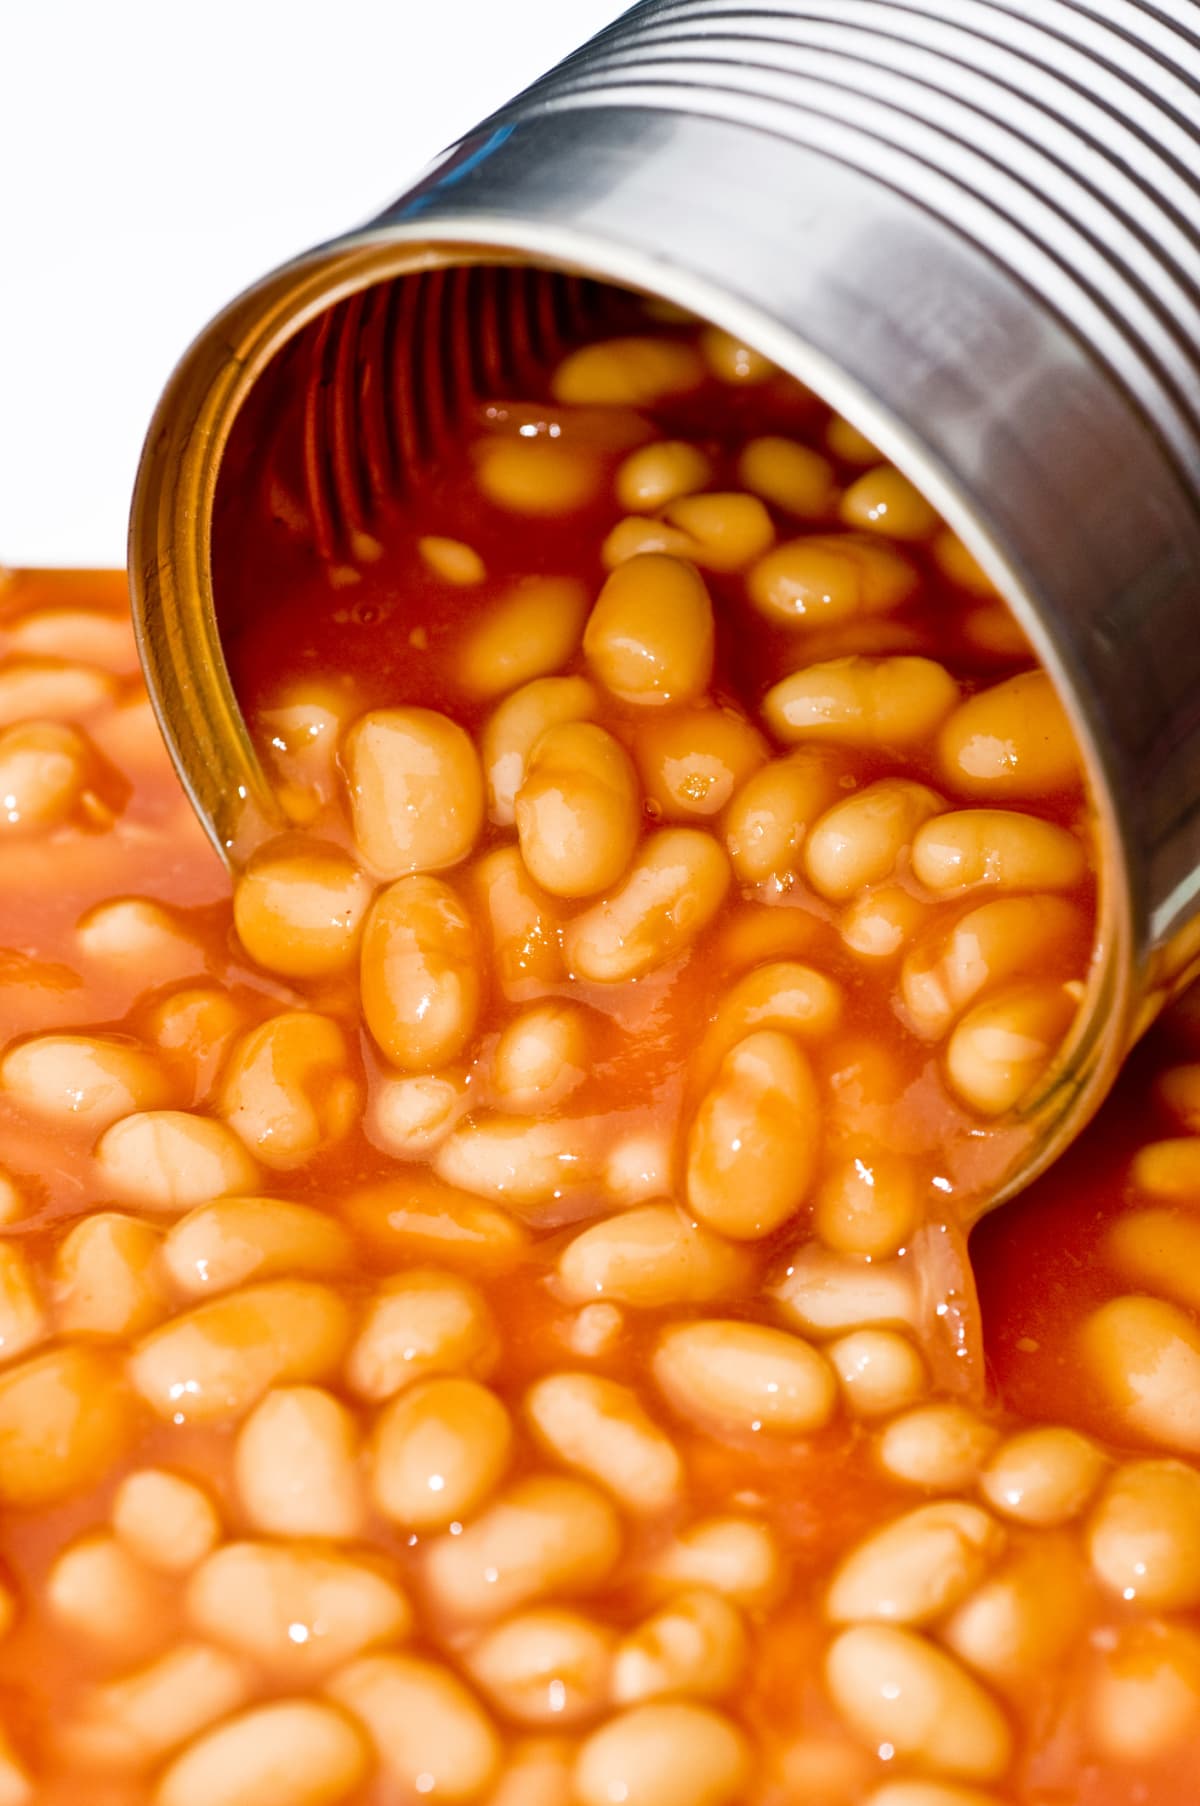 An opened can of baked beans spilling over